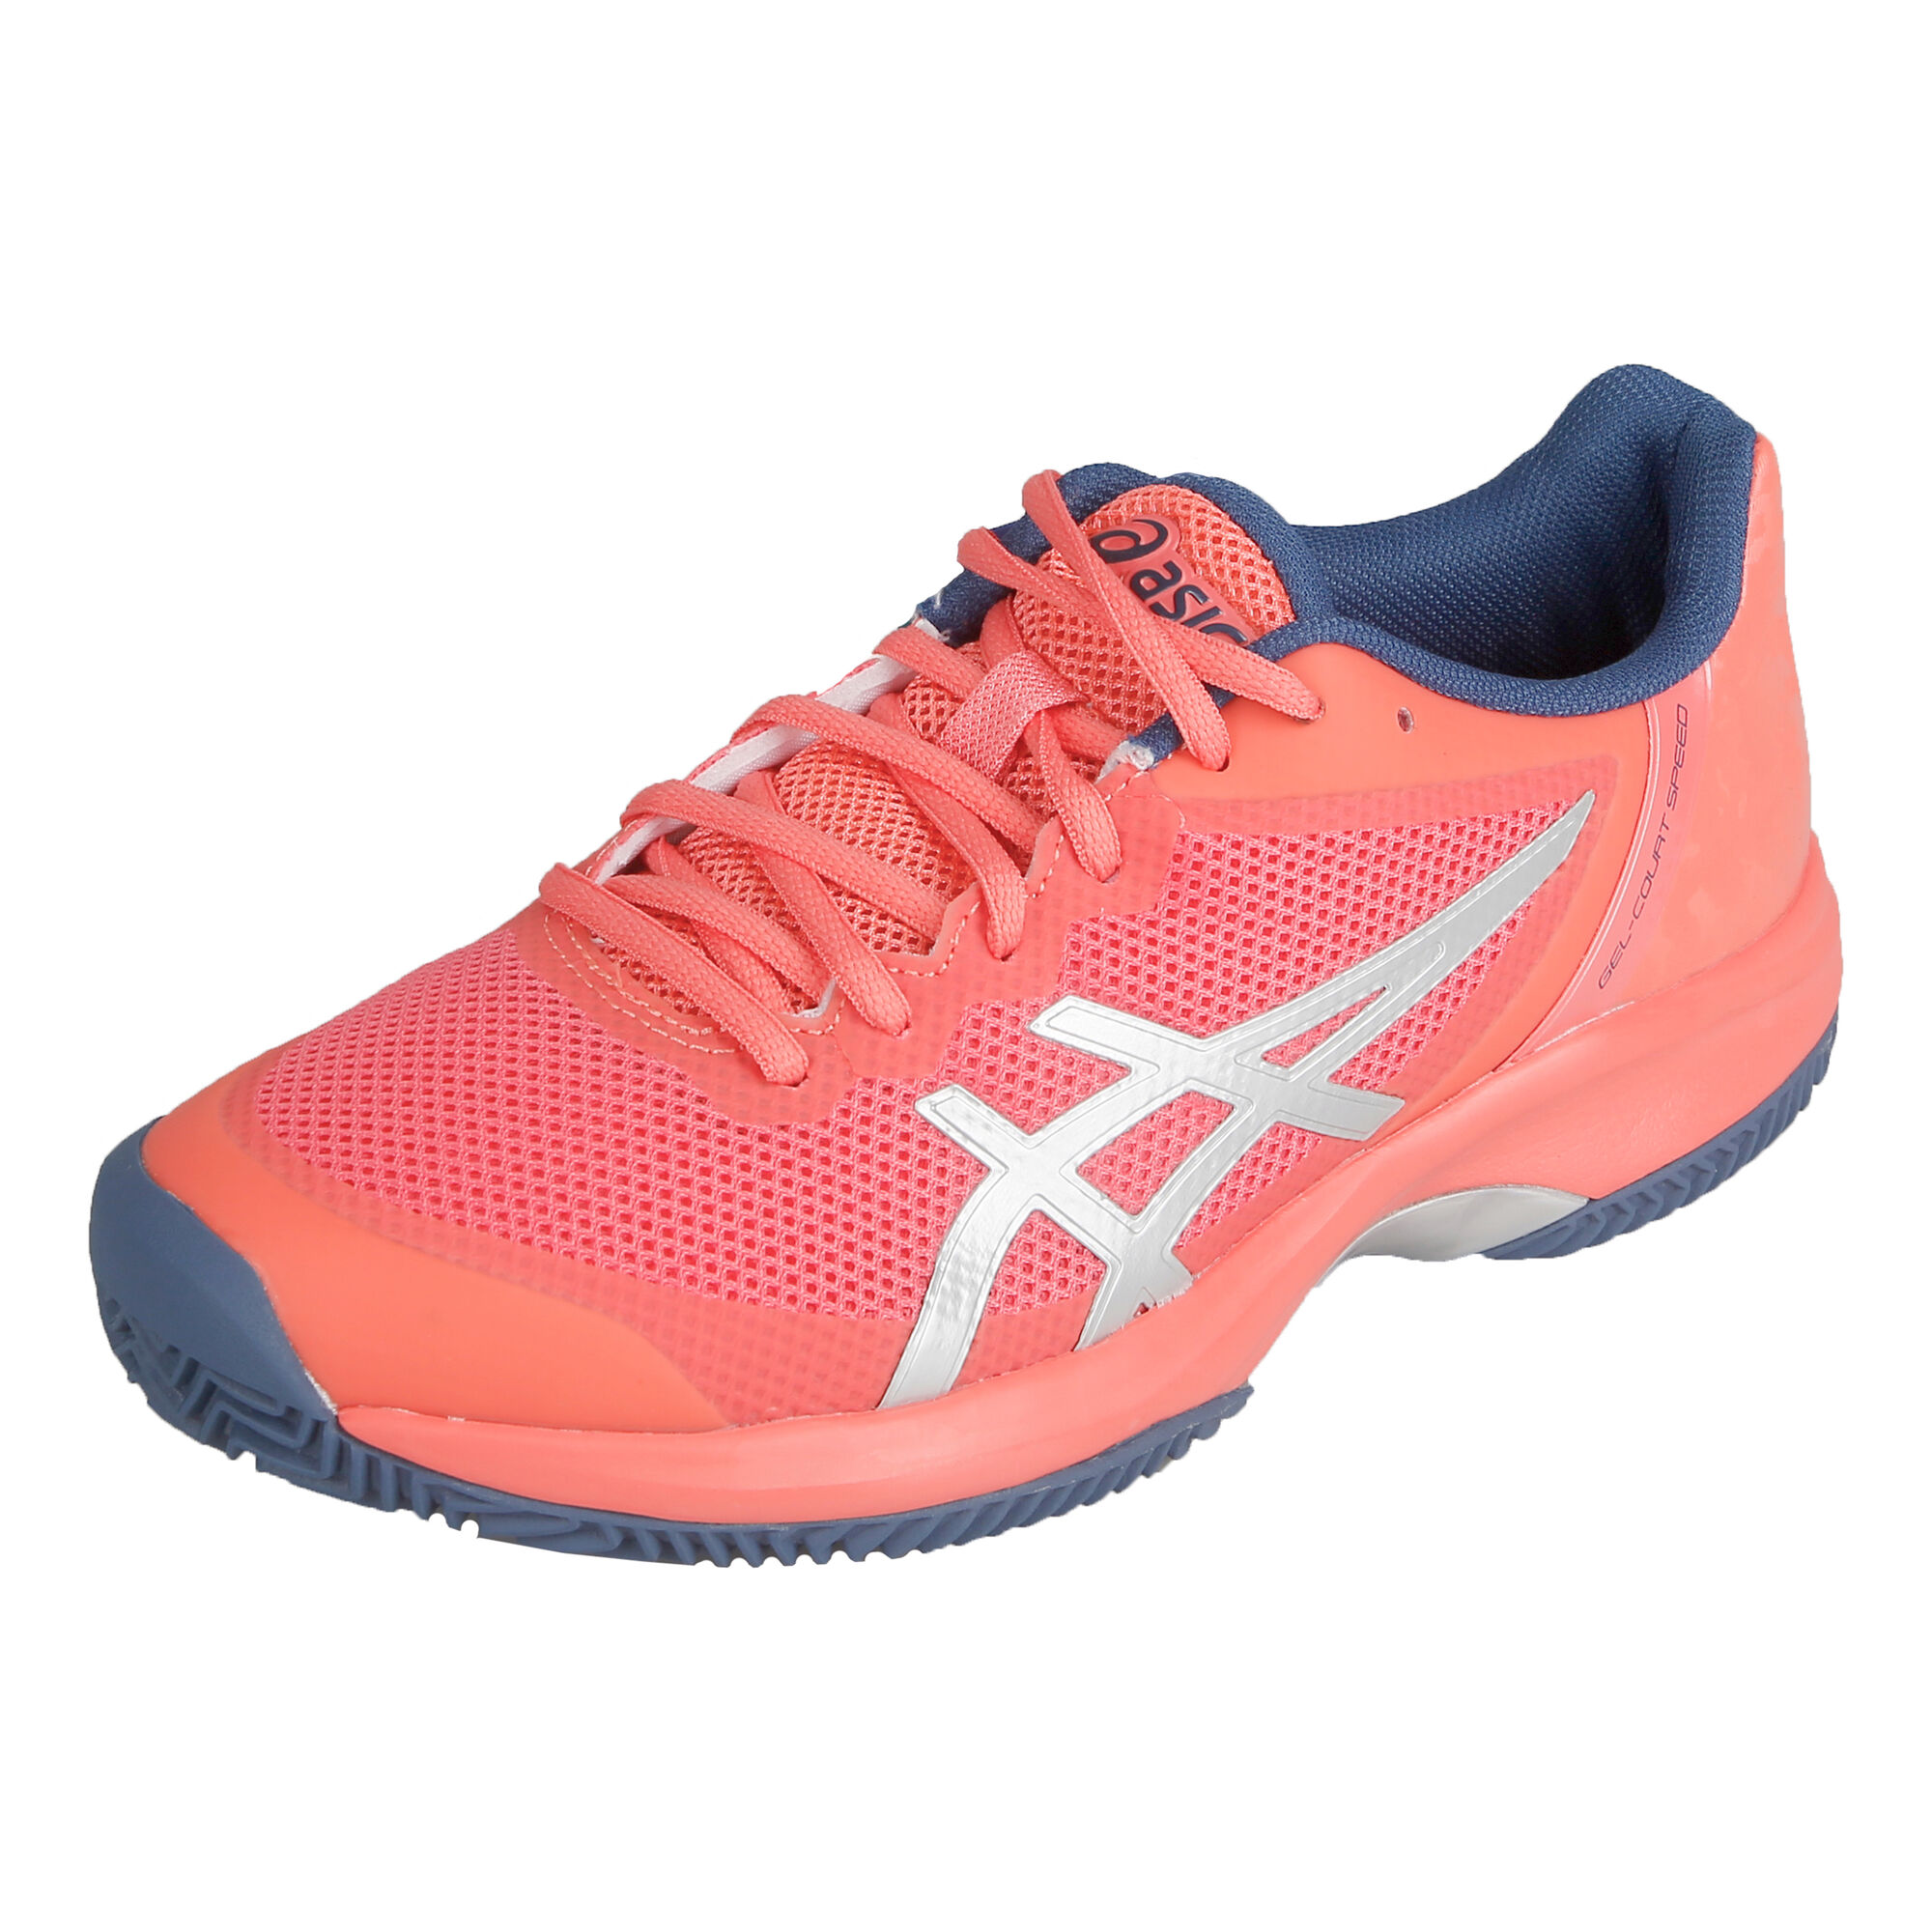 ASICS Gel-Court Speed Clay Zapatilla Mujeres - Coral, Azul Oscuro compra online | Tennis-Point